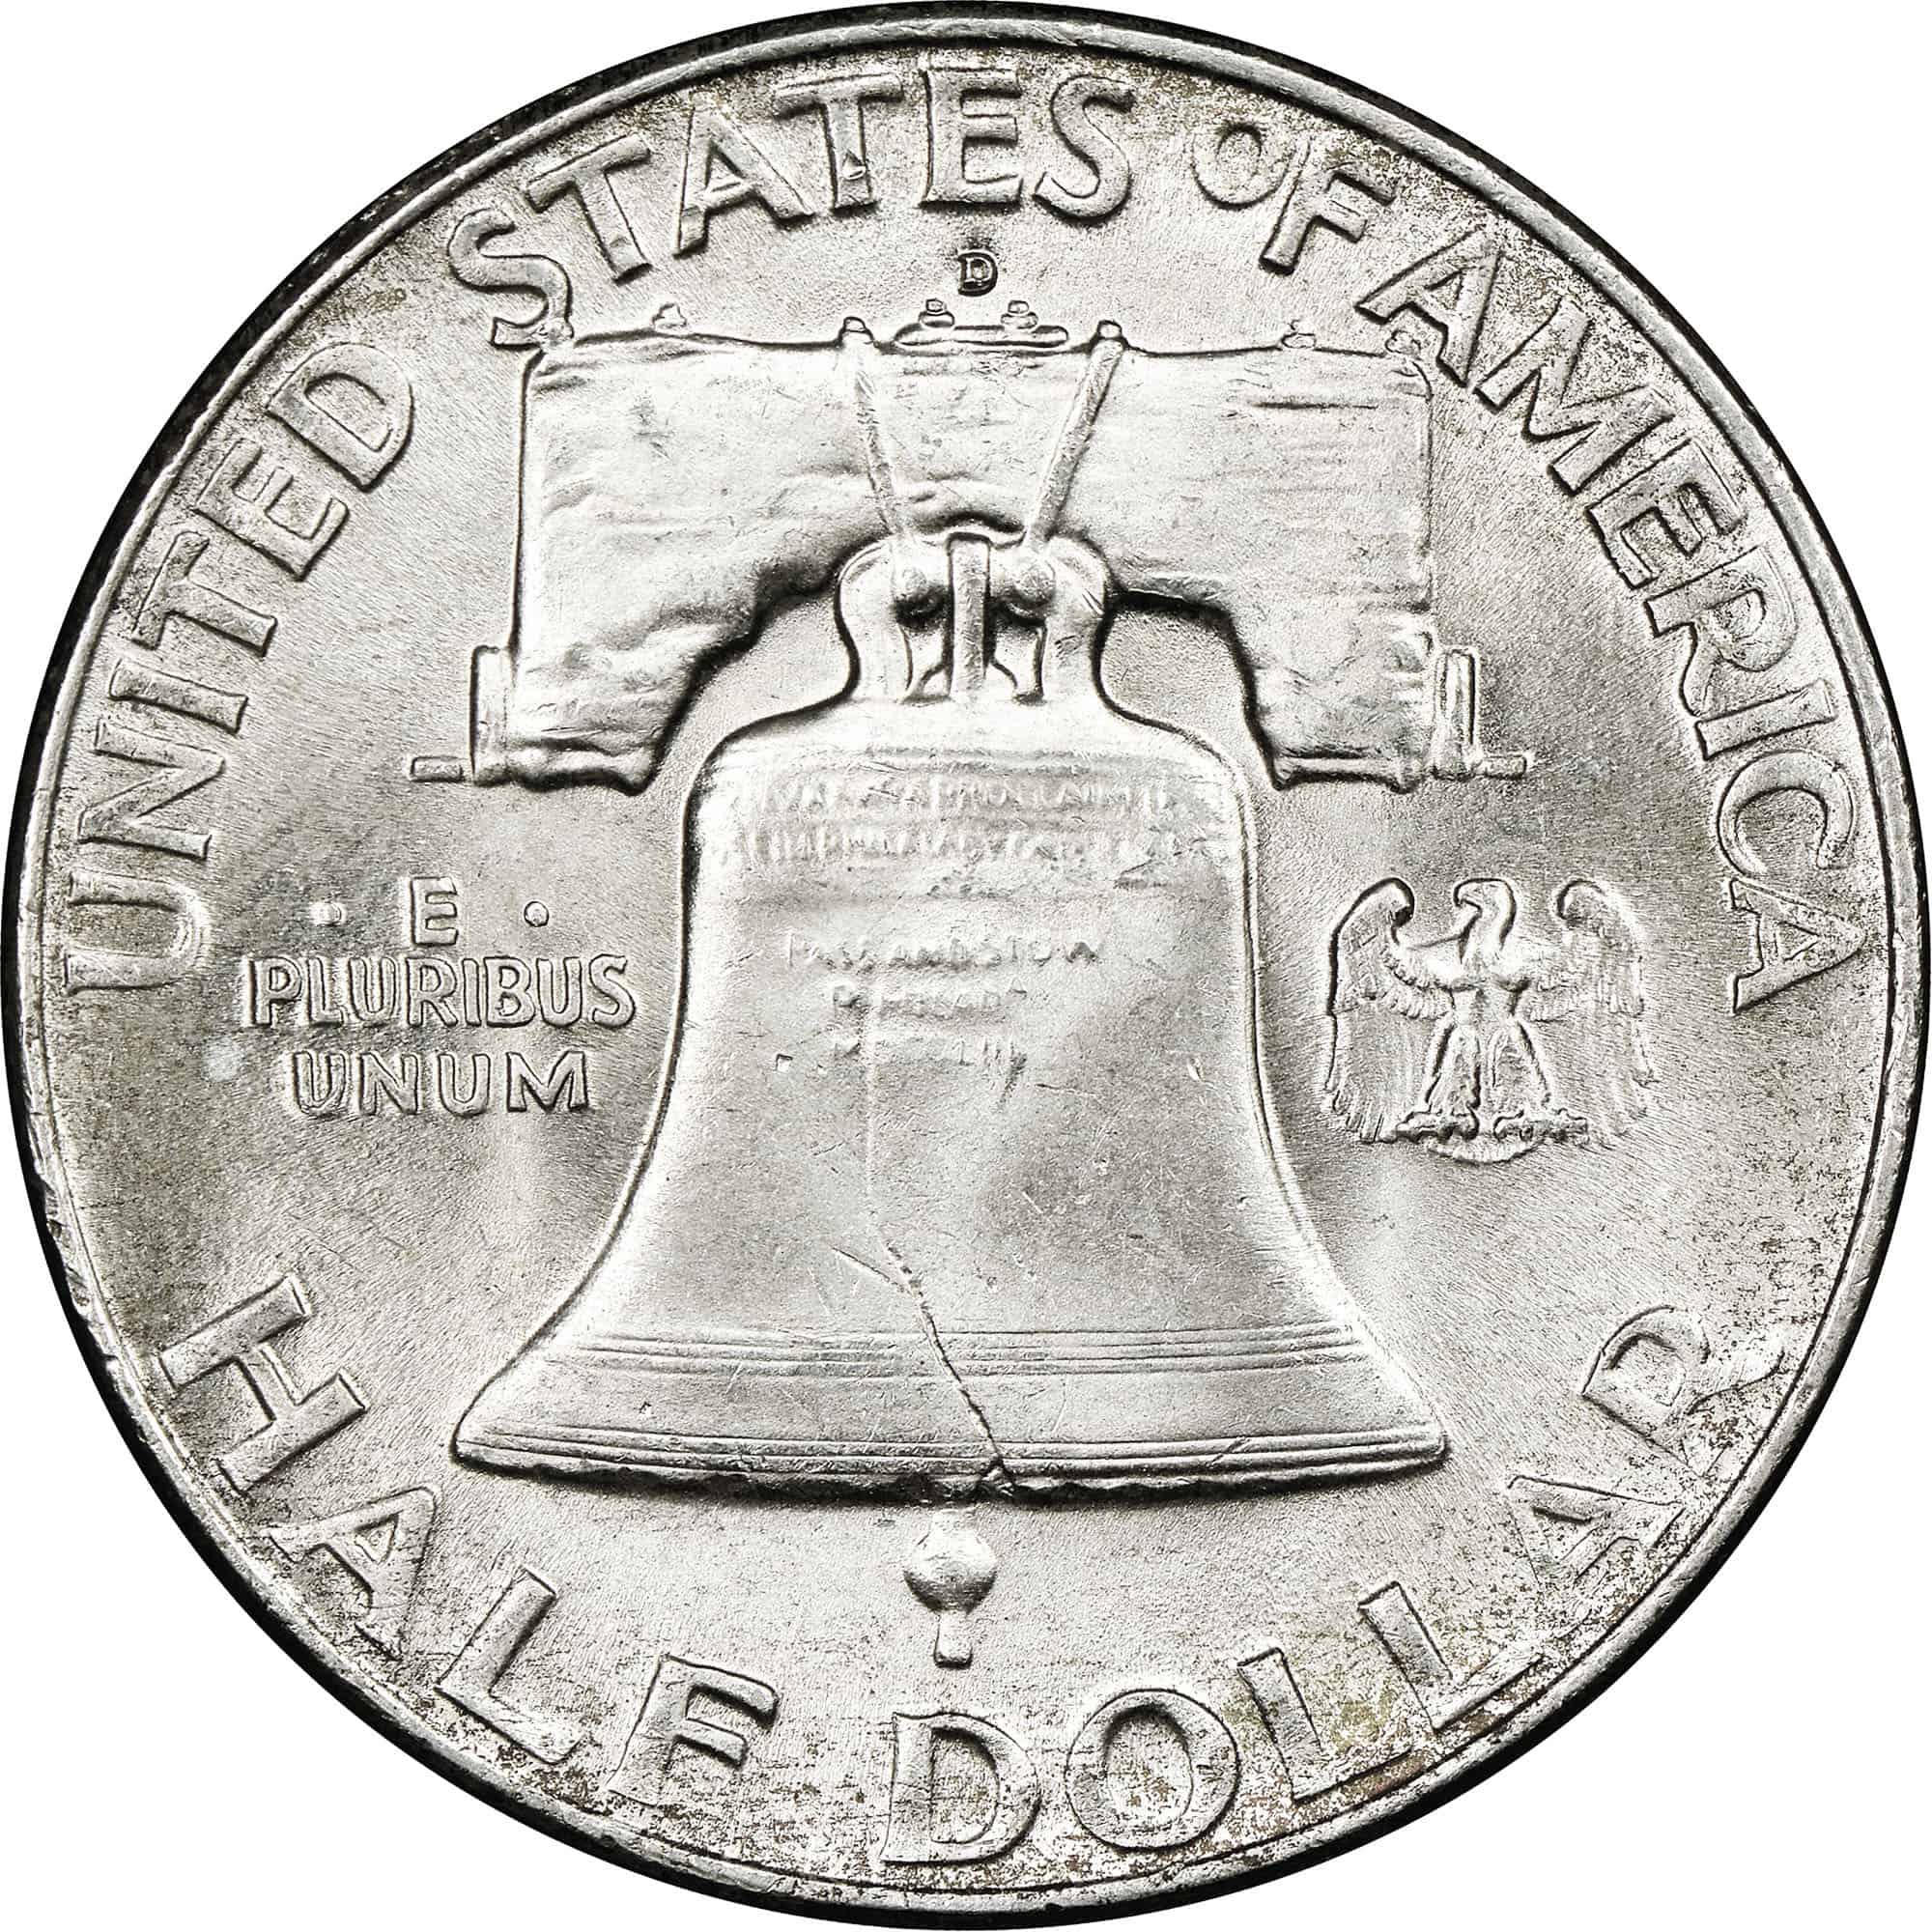 The Reverse of the 1951 Half Dollar